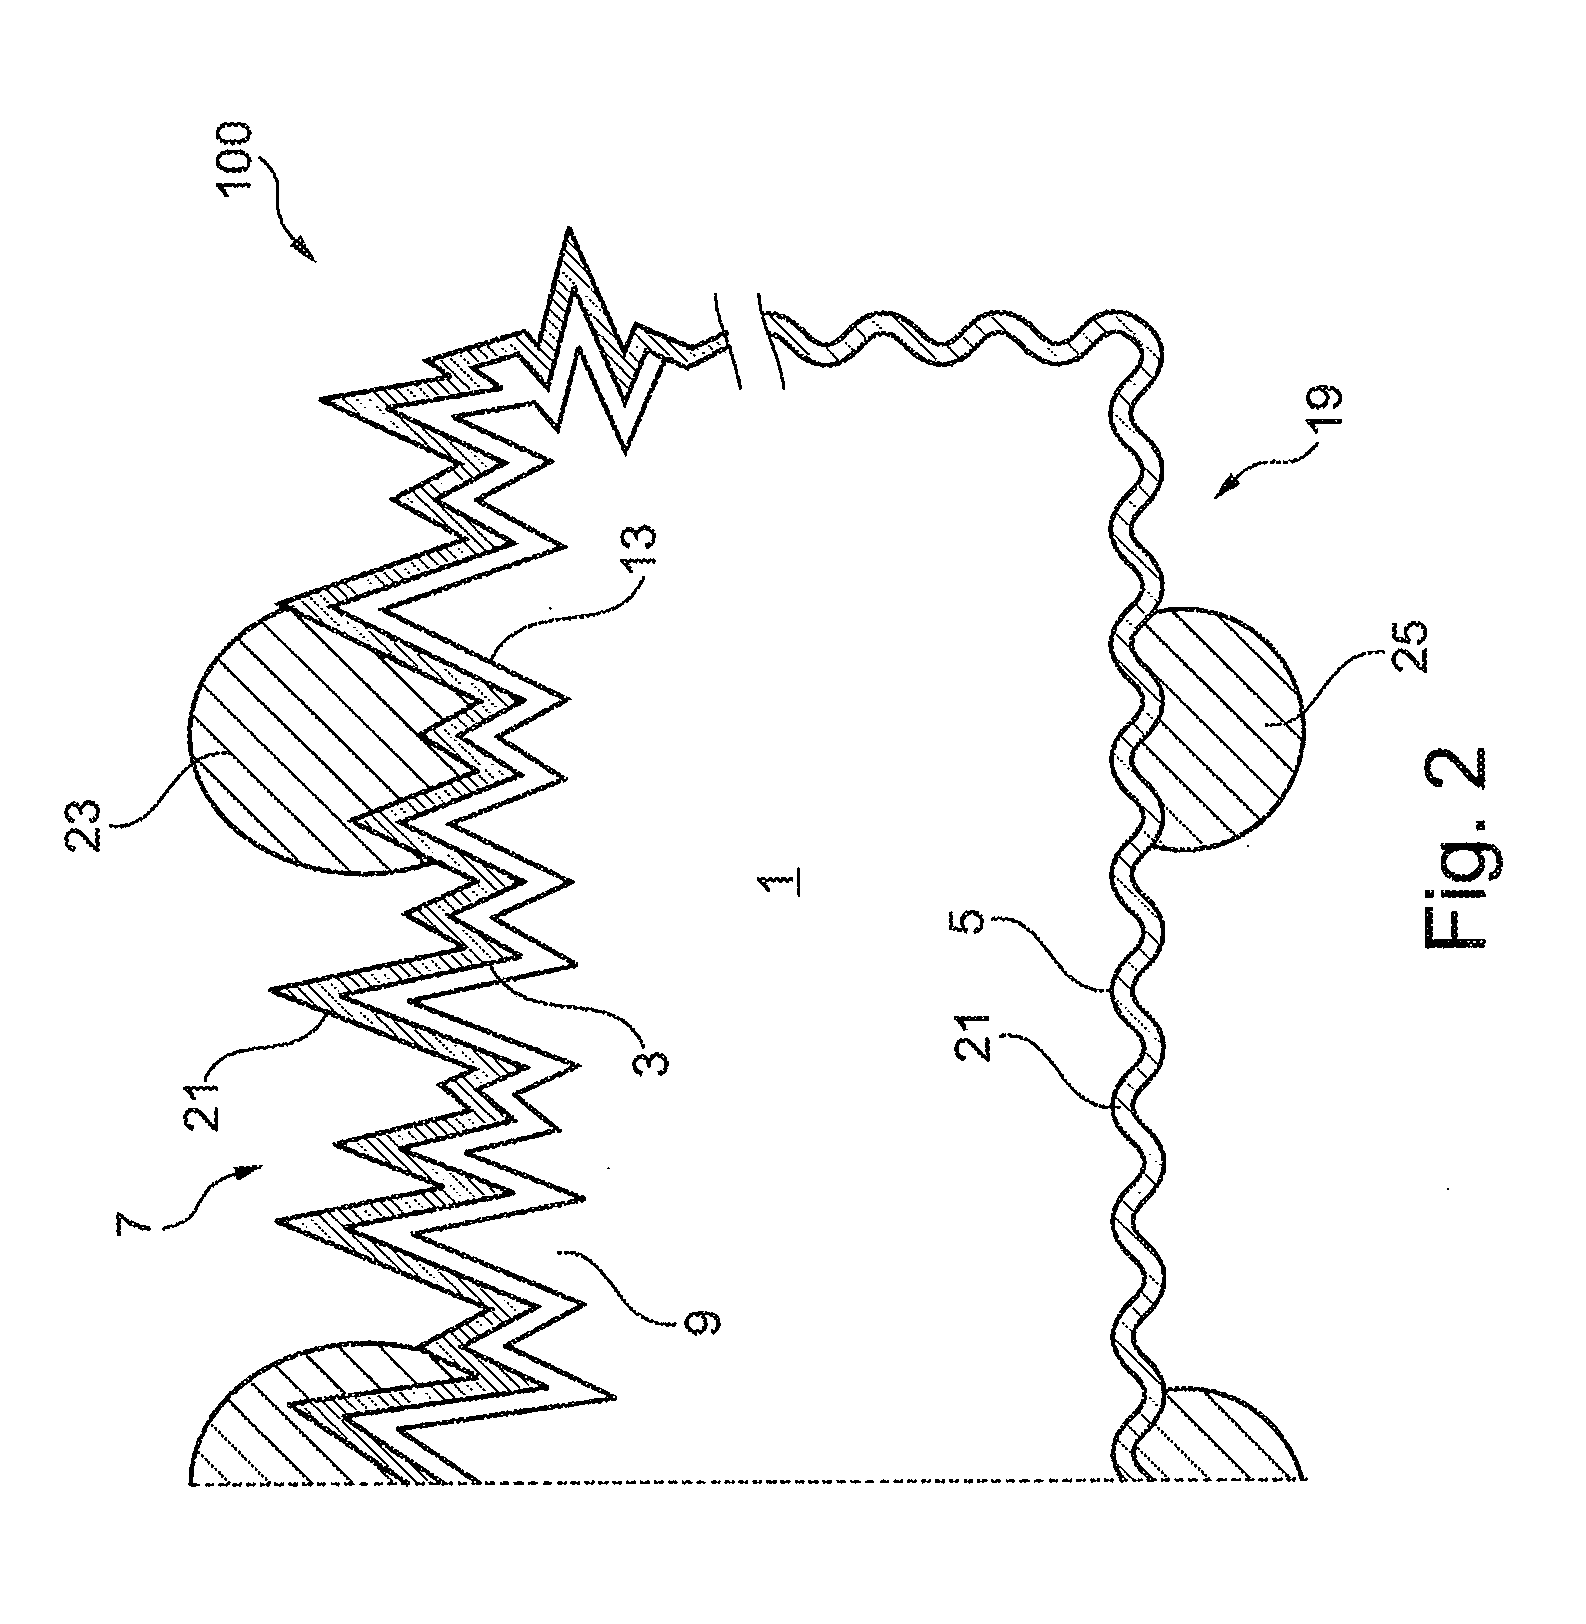 Method for producing a solar cell having a textured front face and corresponding solar cell